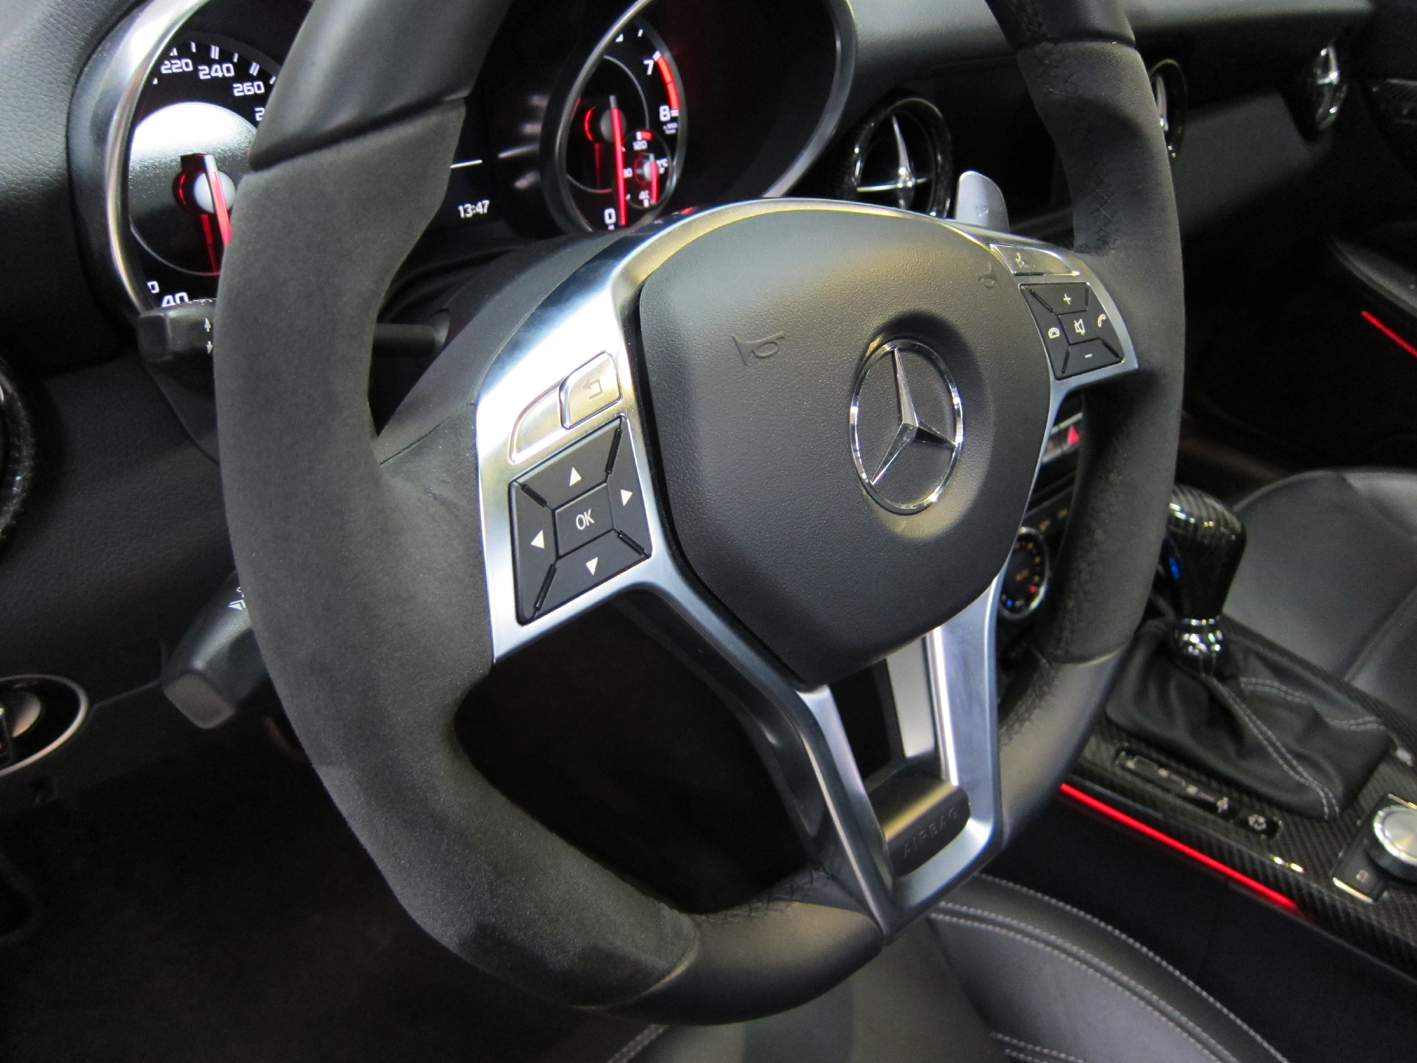 Mercedes SLK 172 Tuning with a AMG Steering Wheel from Chrometec